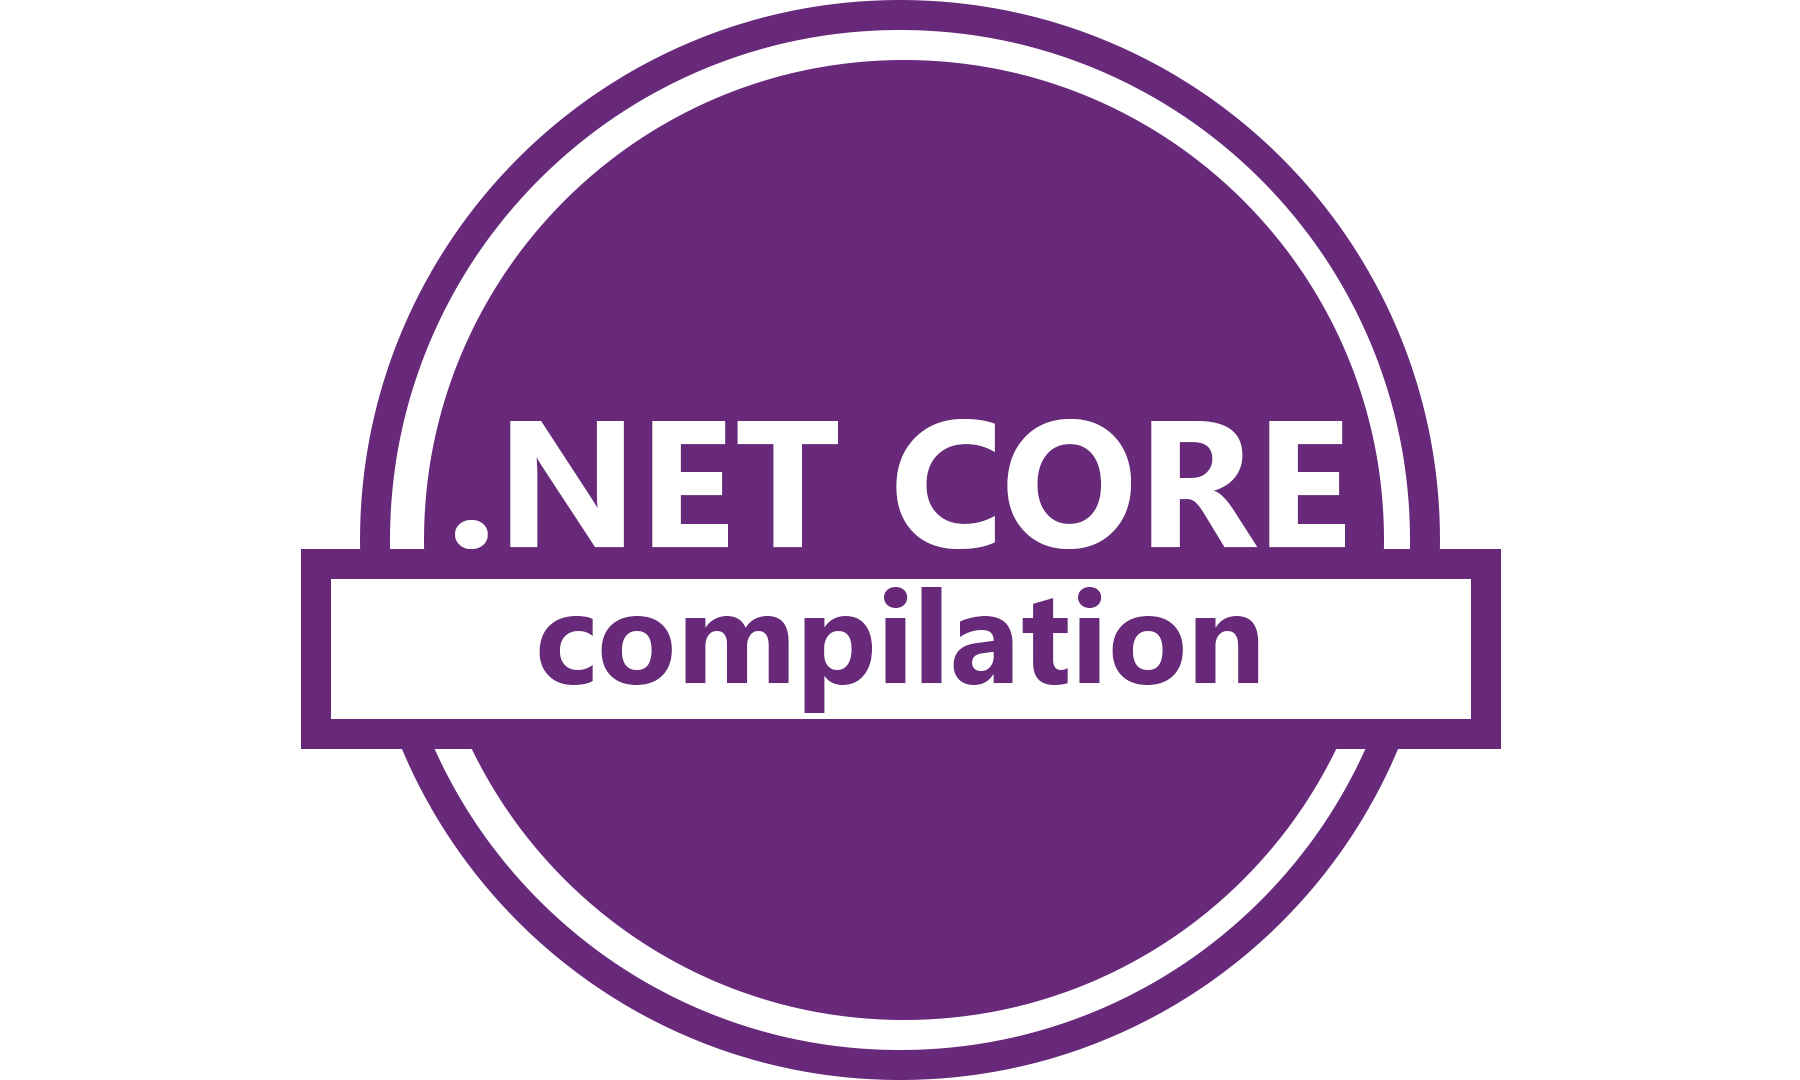 compilation in net core